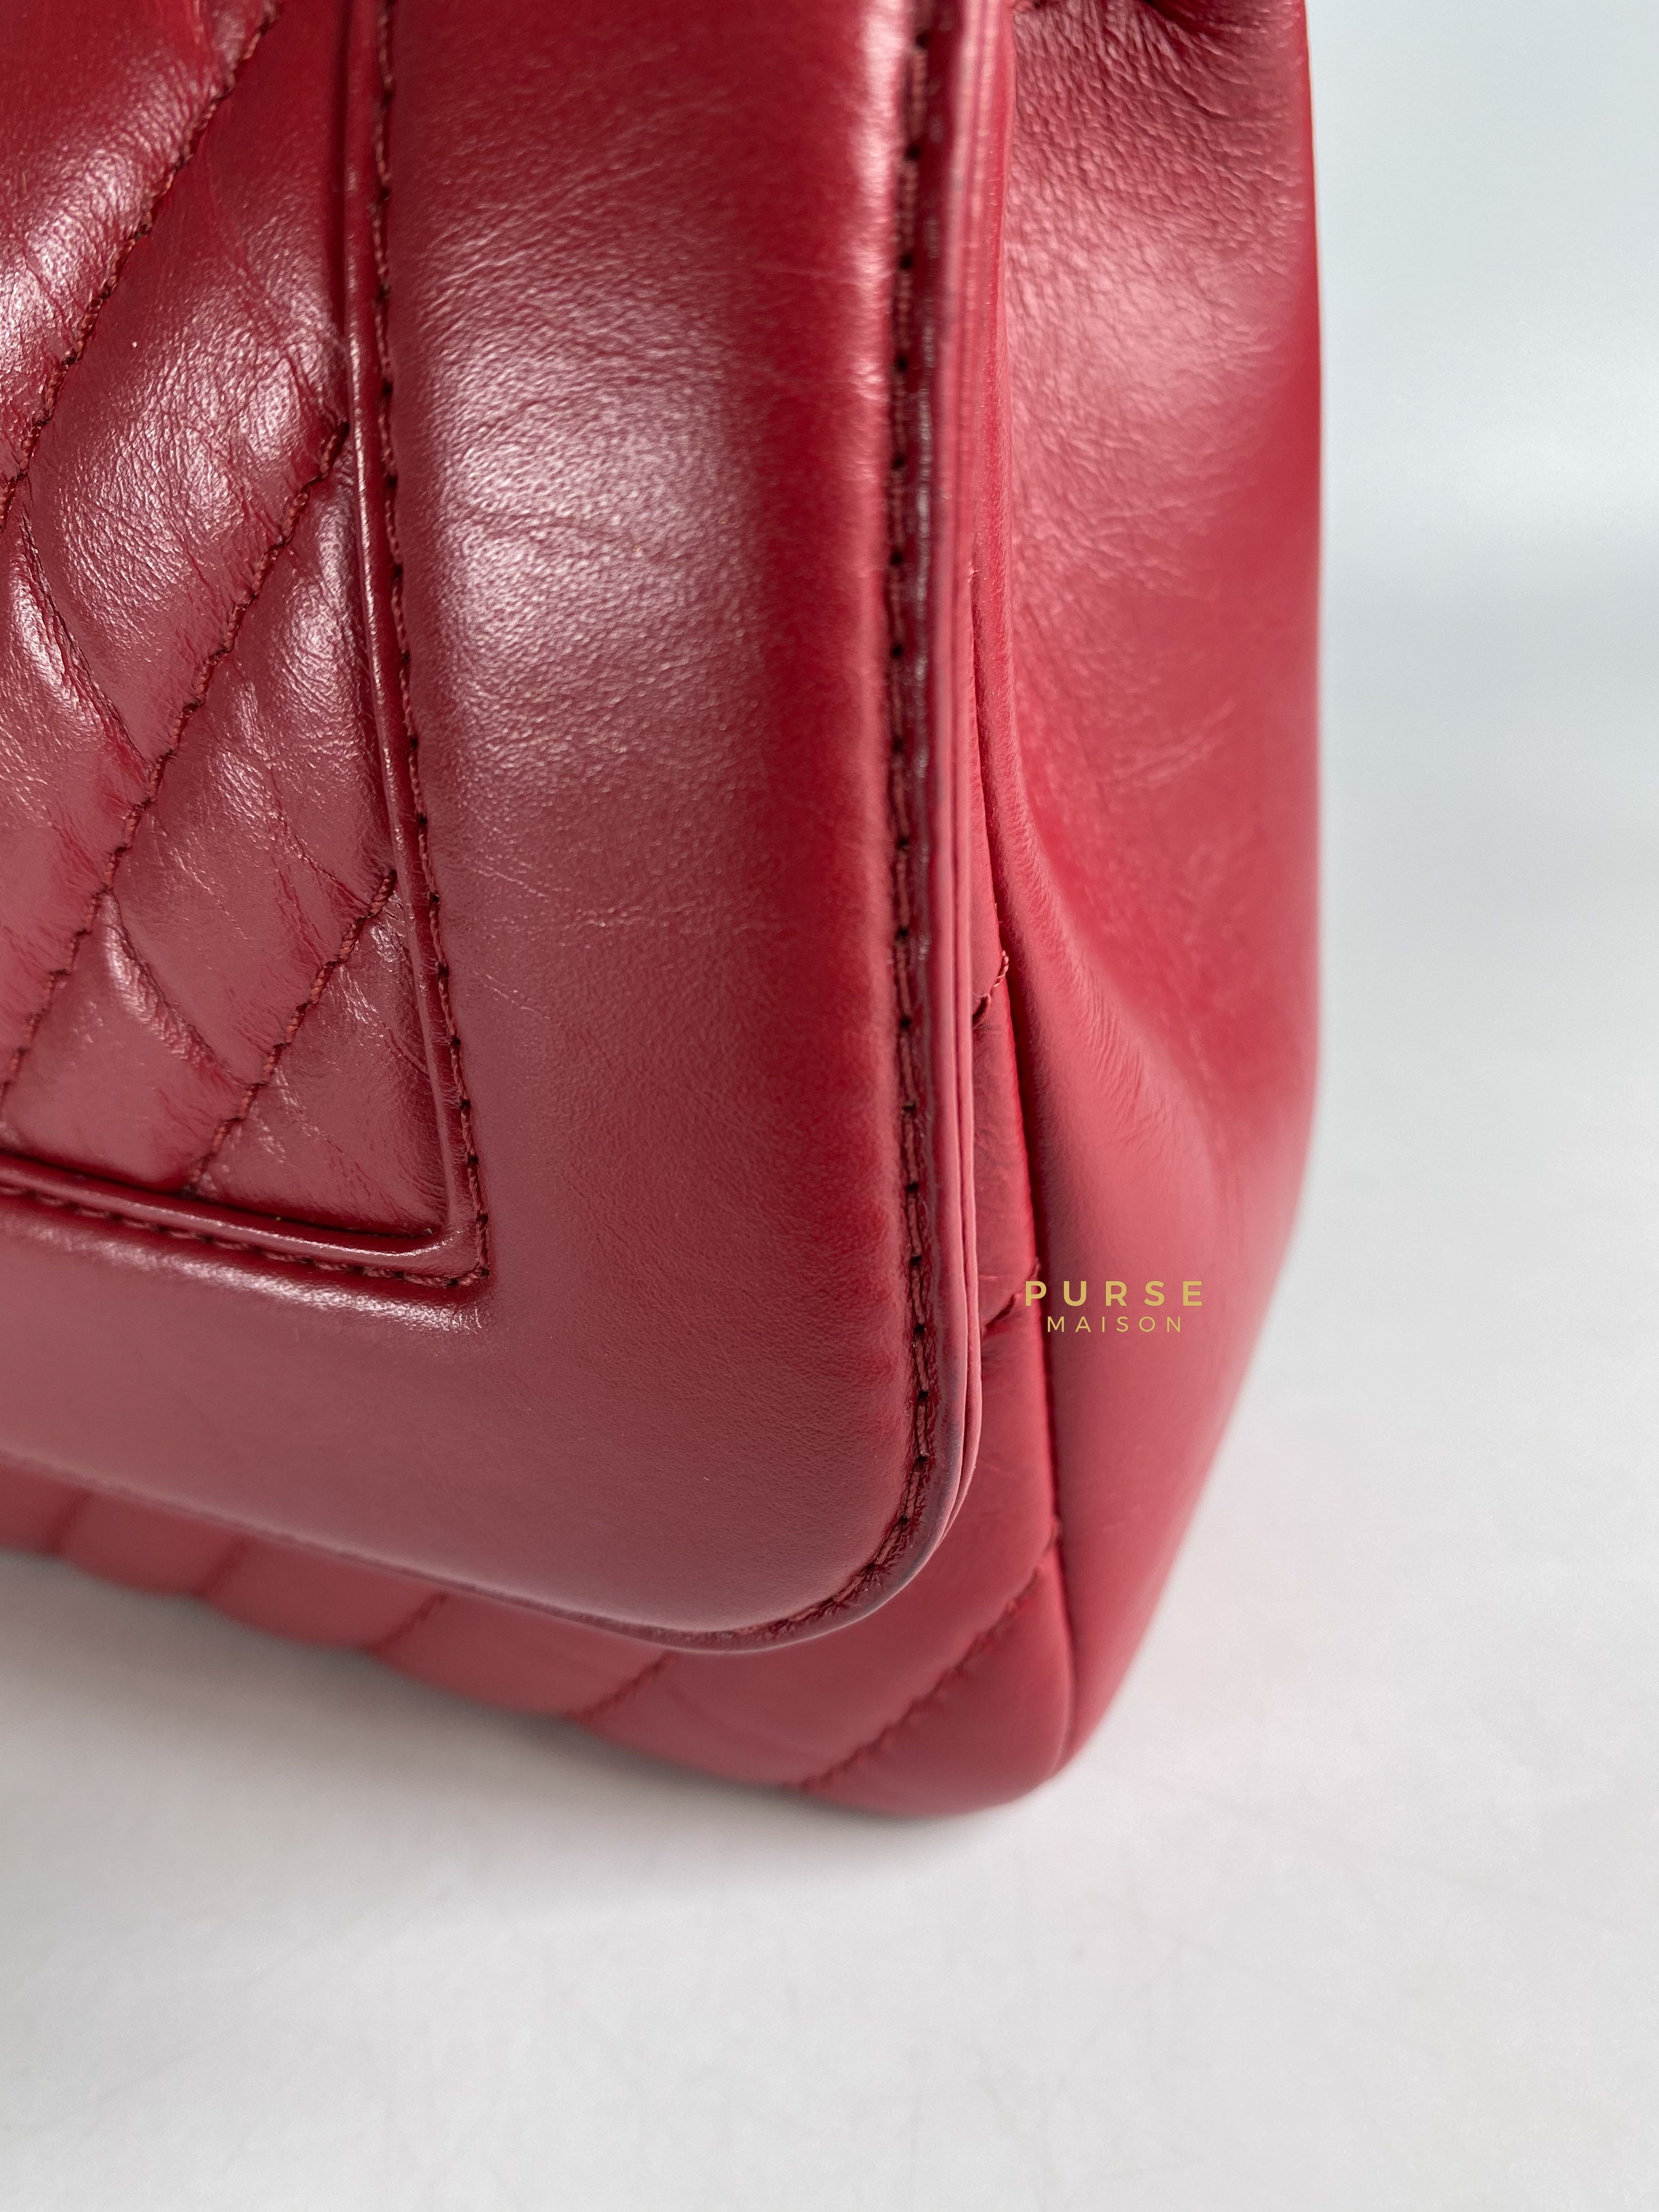 Chanel Red Chevron Top Handle Aged Calfskin & Gold Hardware Series 24 | Purse Maison Luxury Bags Shop